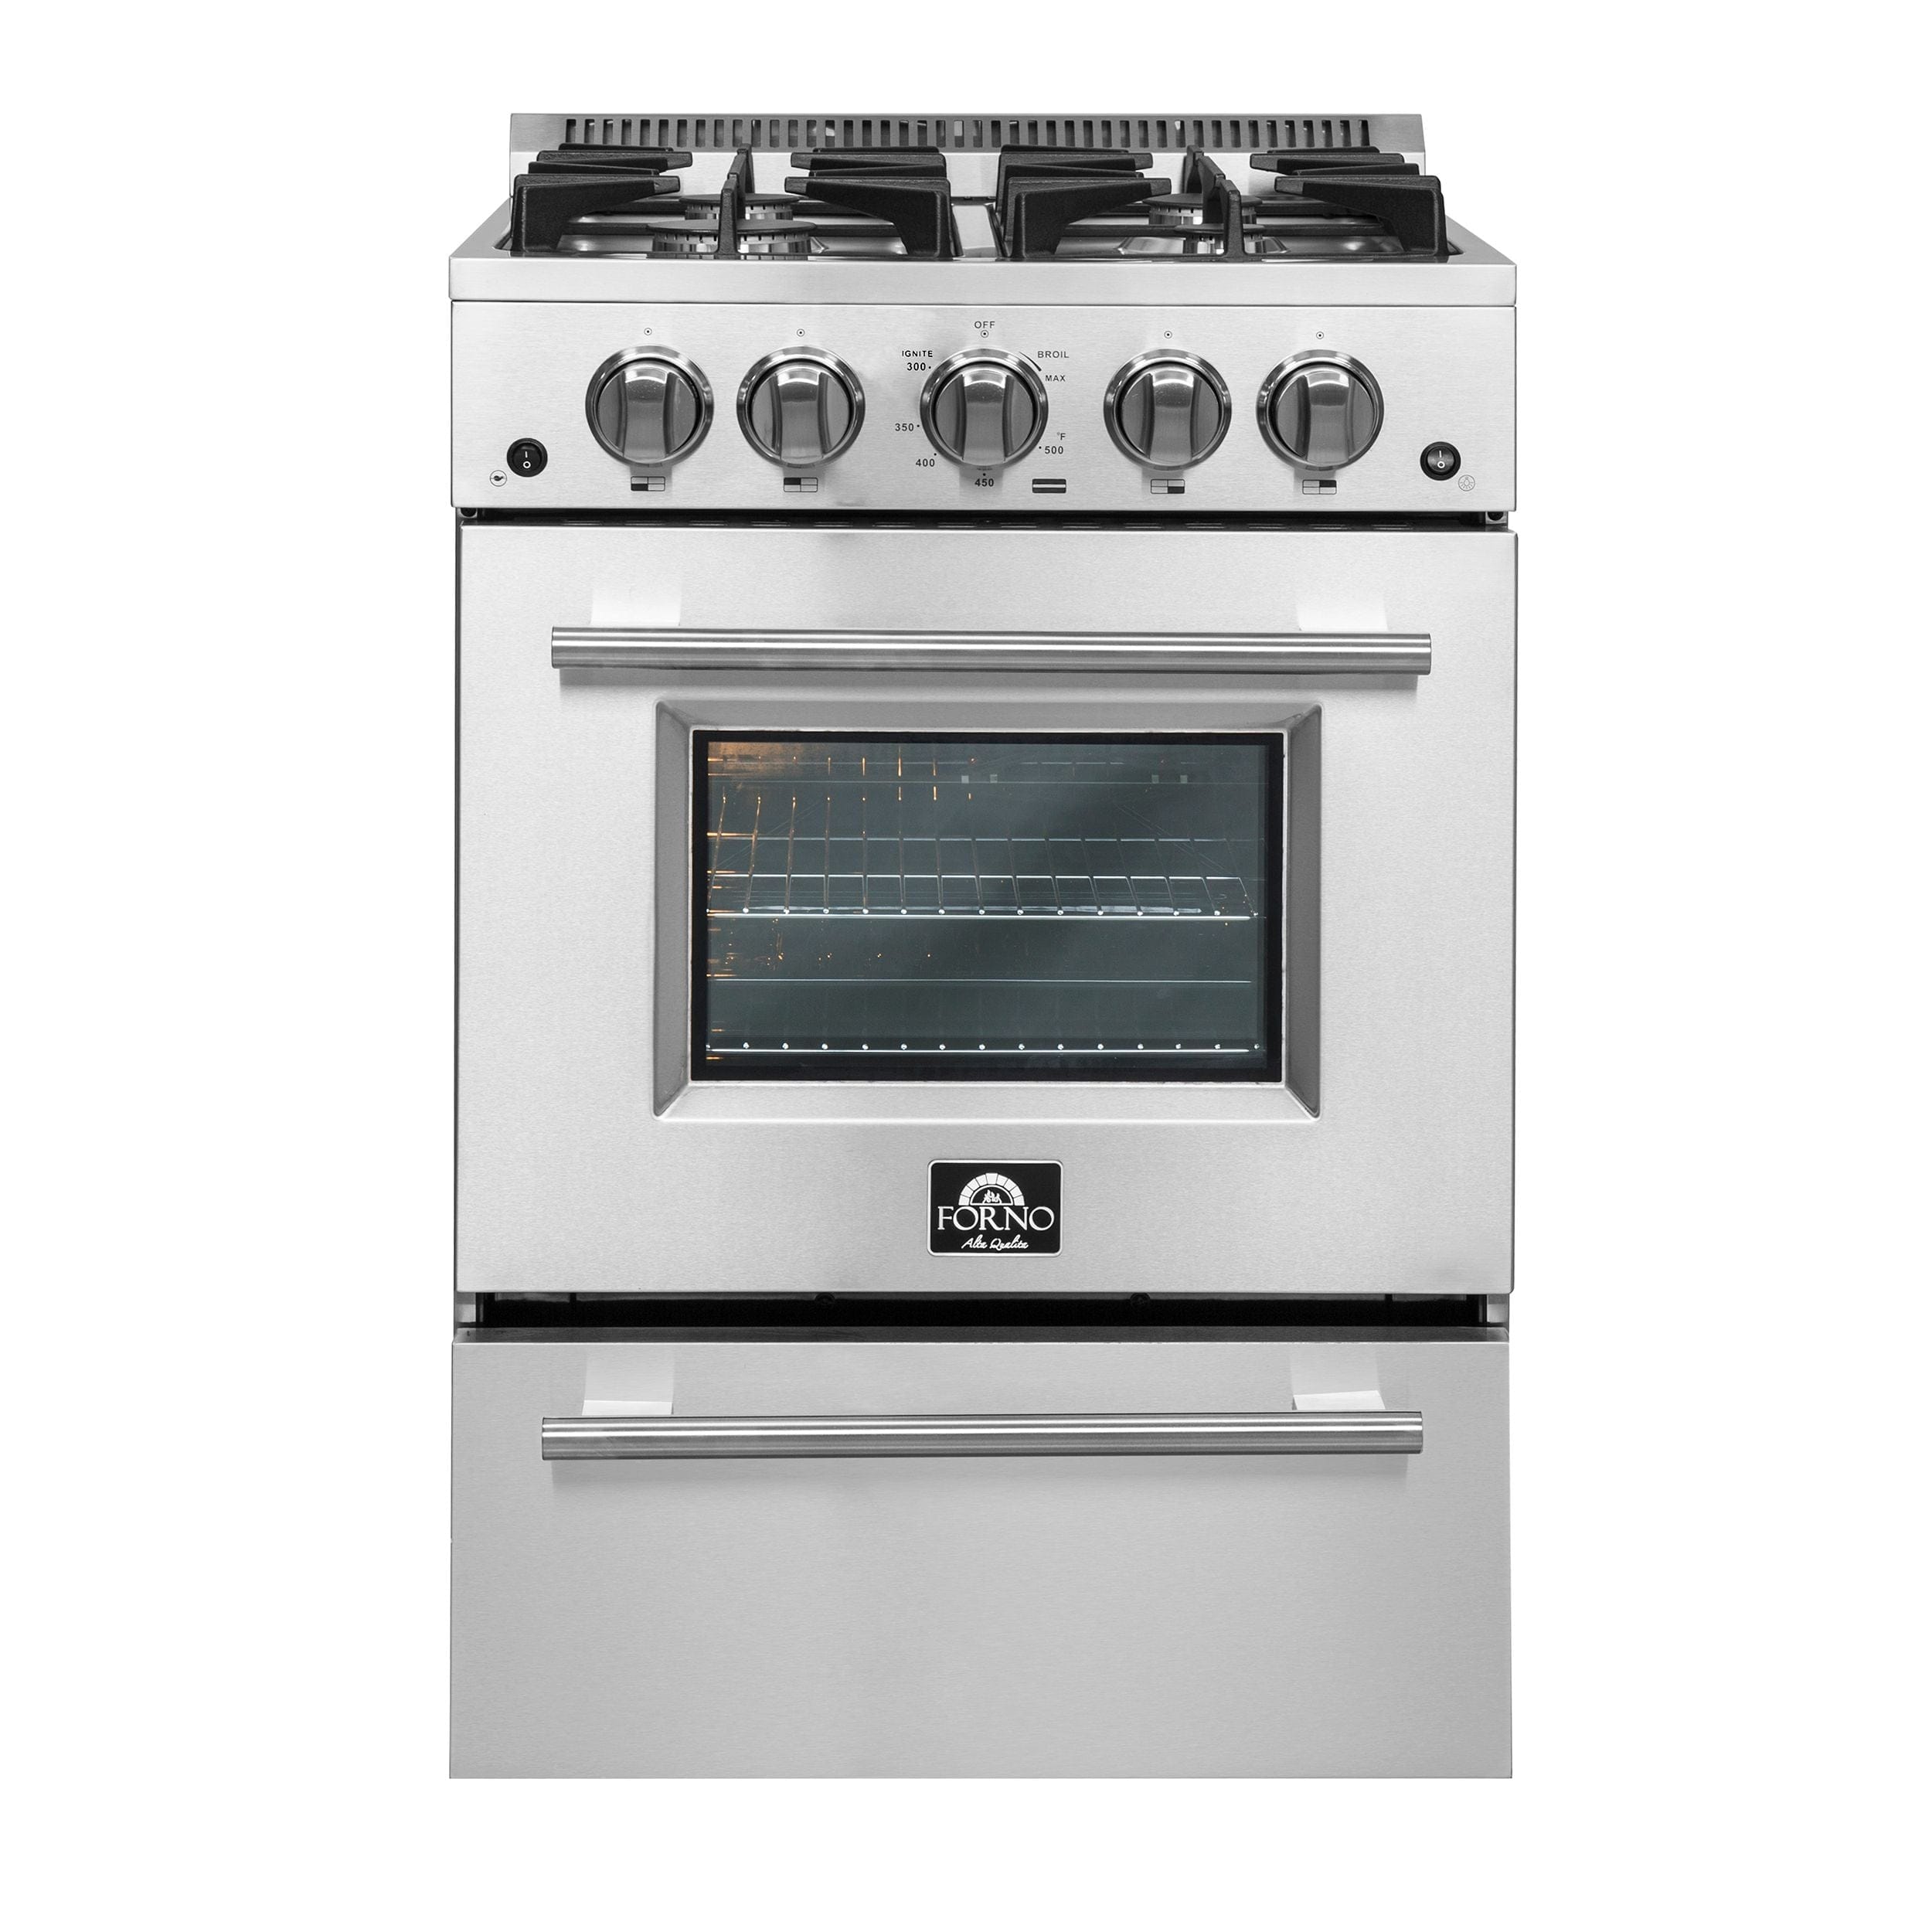 Forno 24" Freestanding Gas Range With 4 Sealed Burners in Stainless Steel, FFSGS6272-24 Range FFSGS6272-24 Luxury Appliances Direct